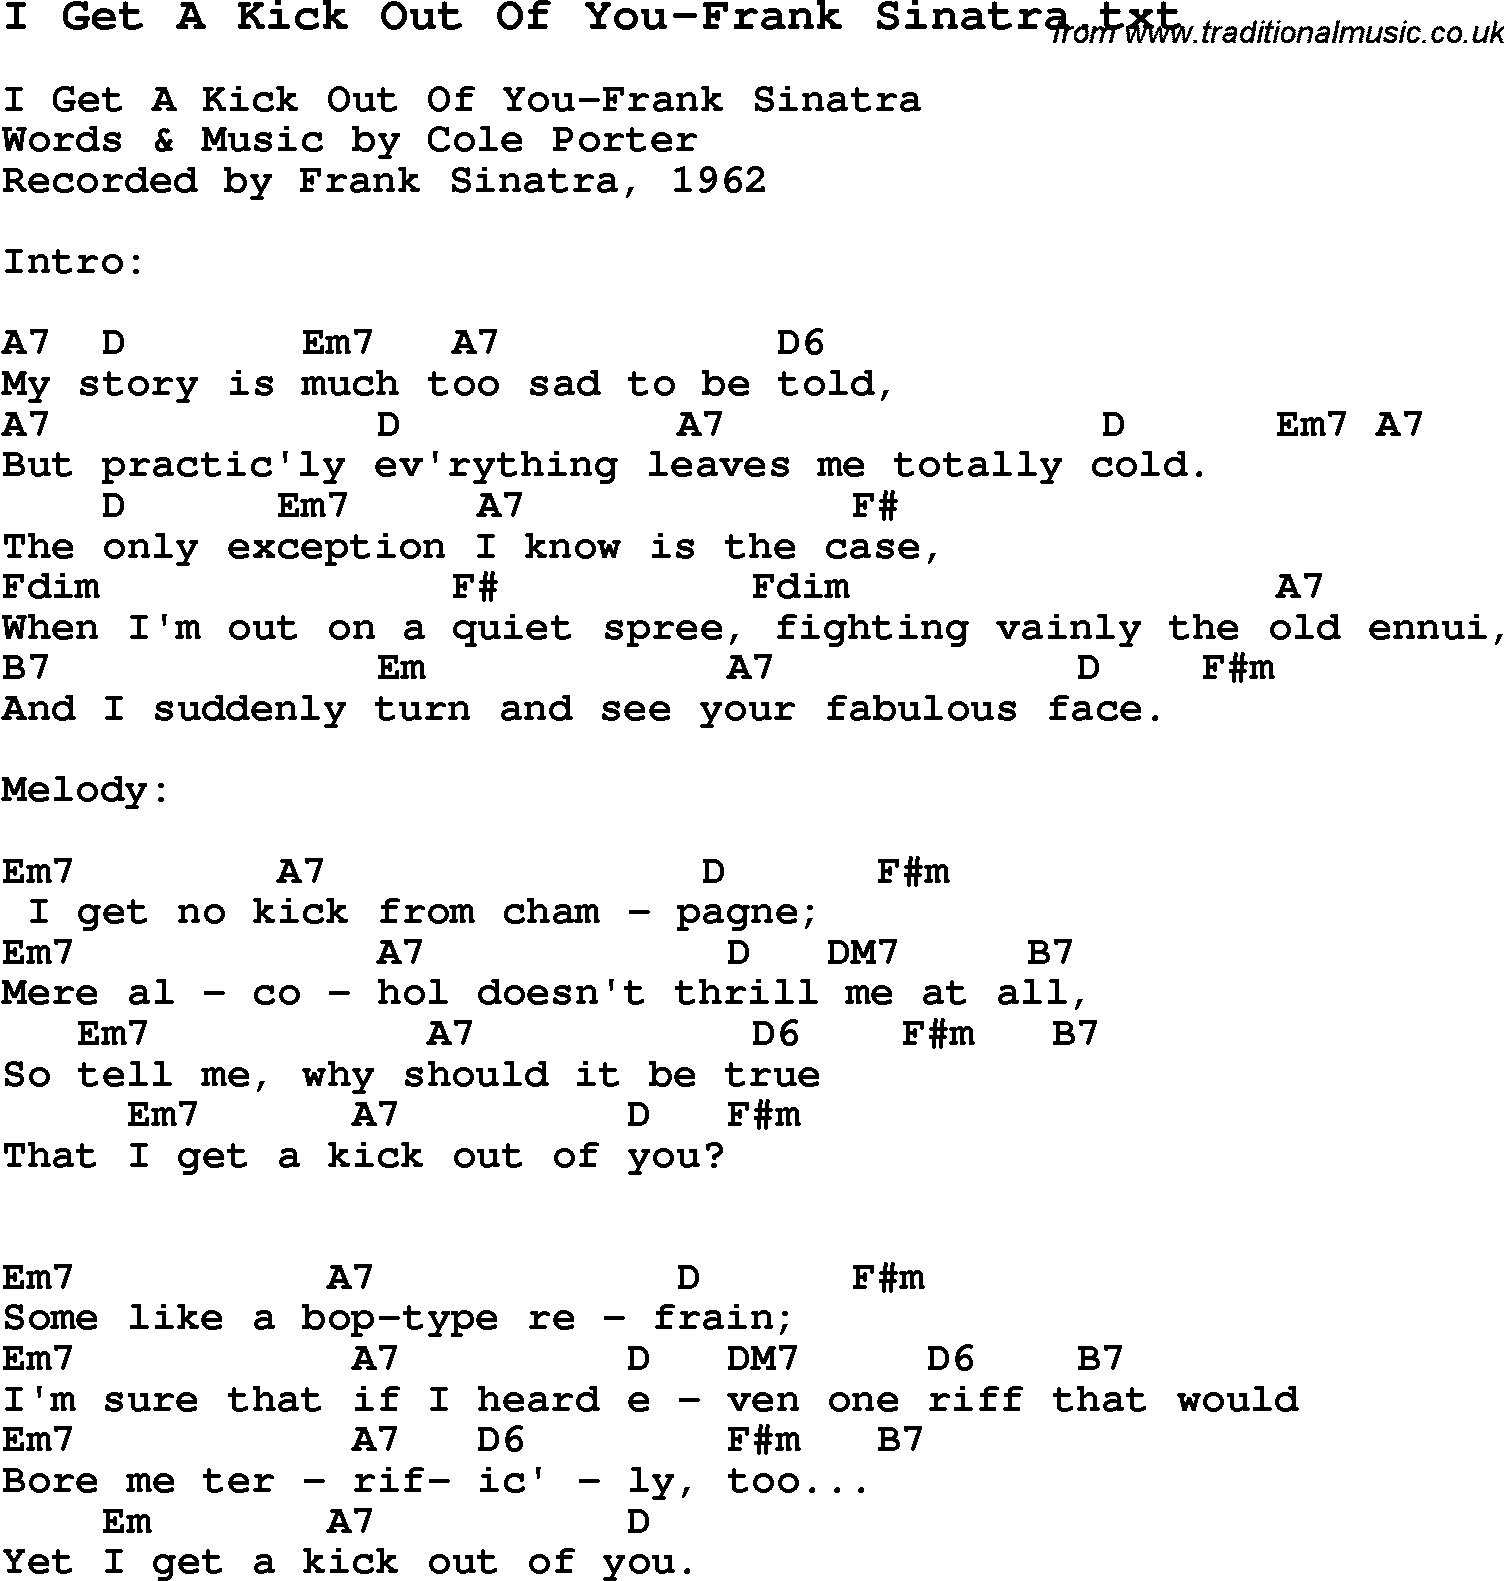 Jazz Song from top bands and vocal artists with chords, tabs and lyrics - I Get A Kick Out Of You-Frank Sinatra